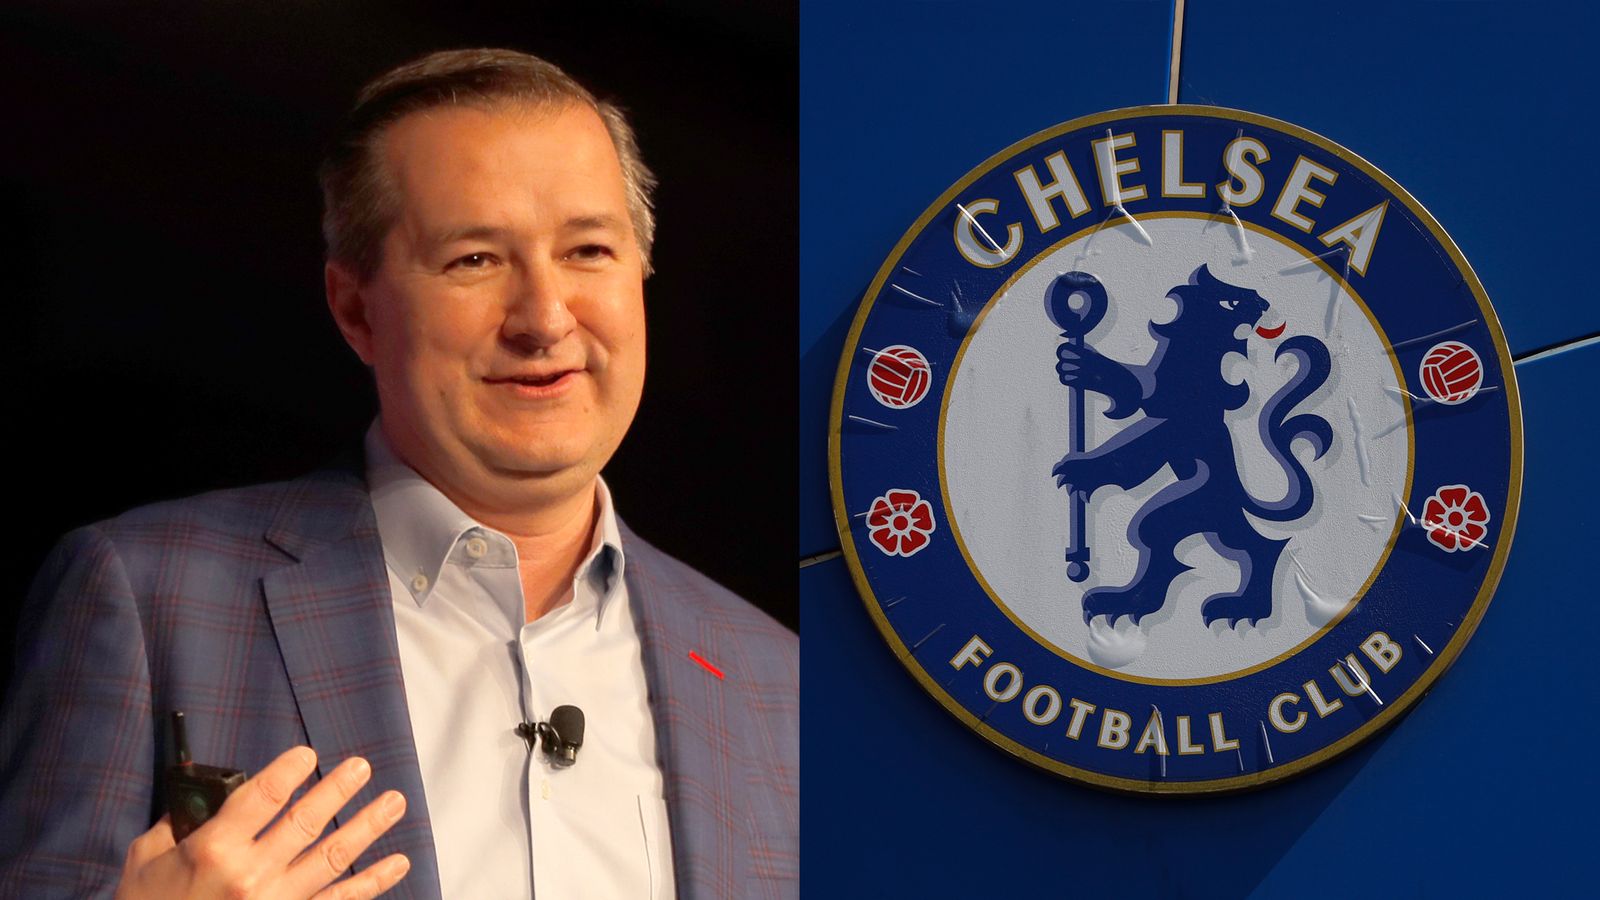 Chelsea sale: Ricketts family promises no European Super League, diversity to be a priority and Stamford Bridge upgrade plans | Football News